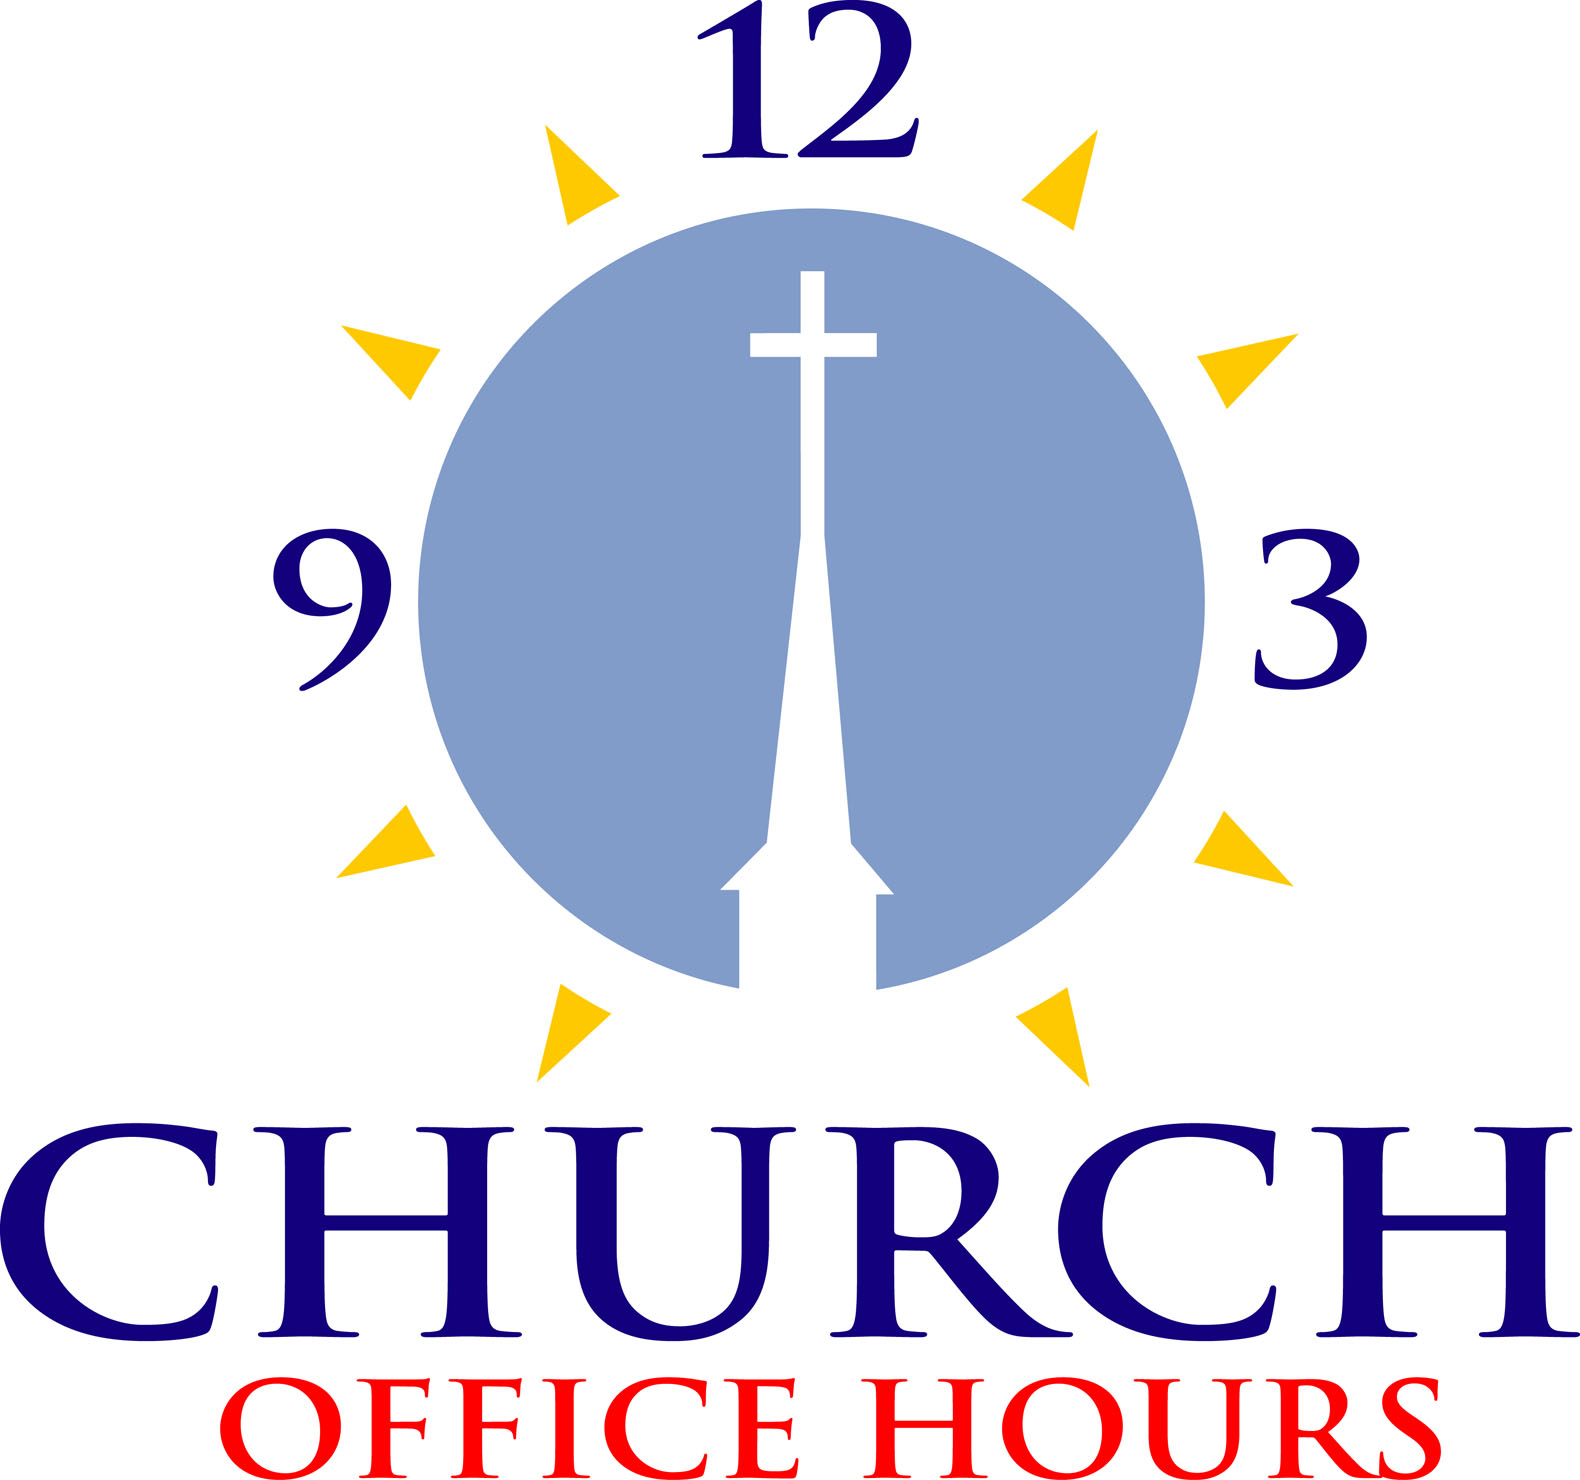 Free office clipart image 9